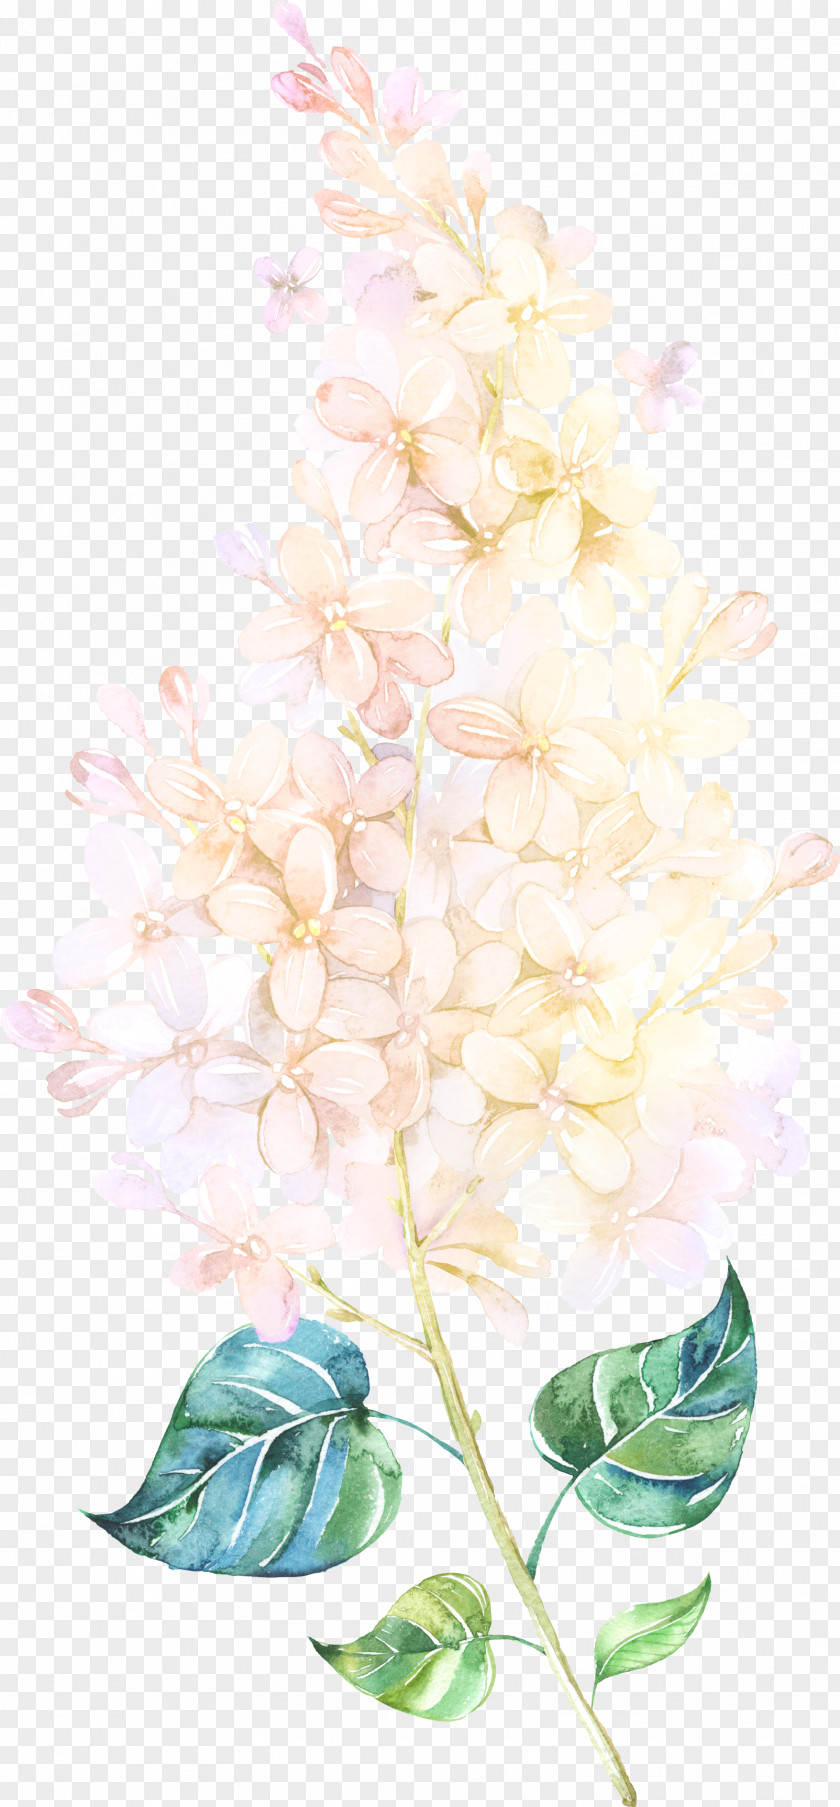 Floating Flower Watercolor Painting Floral Design PNG